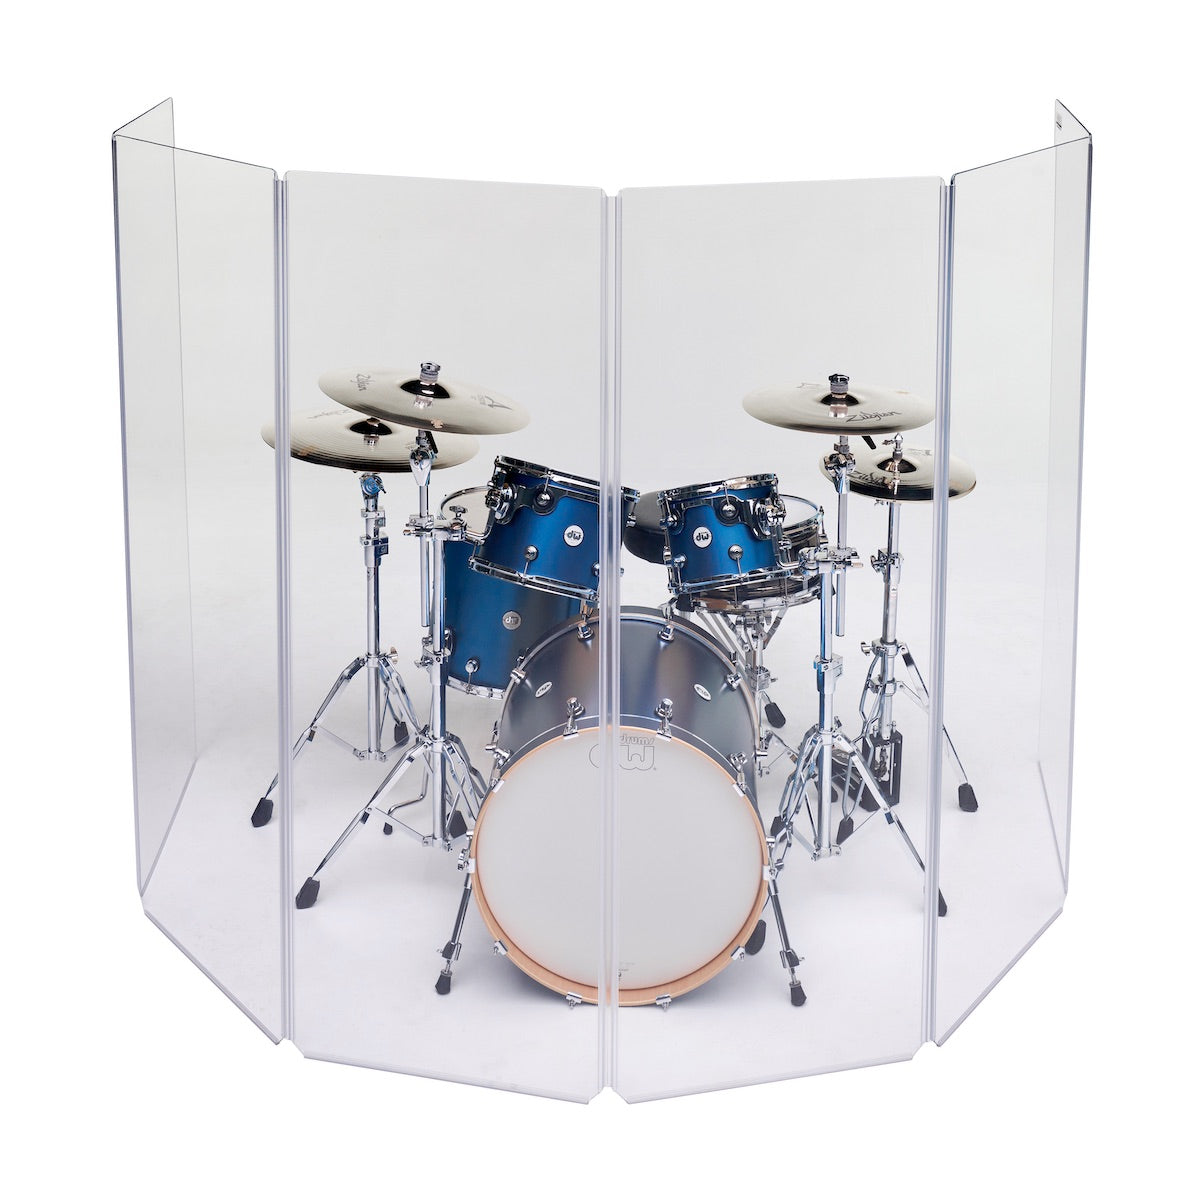 ClearSonic A2466x6 Drum Shield - 6 panel Sound Isolation System, front